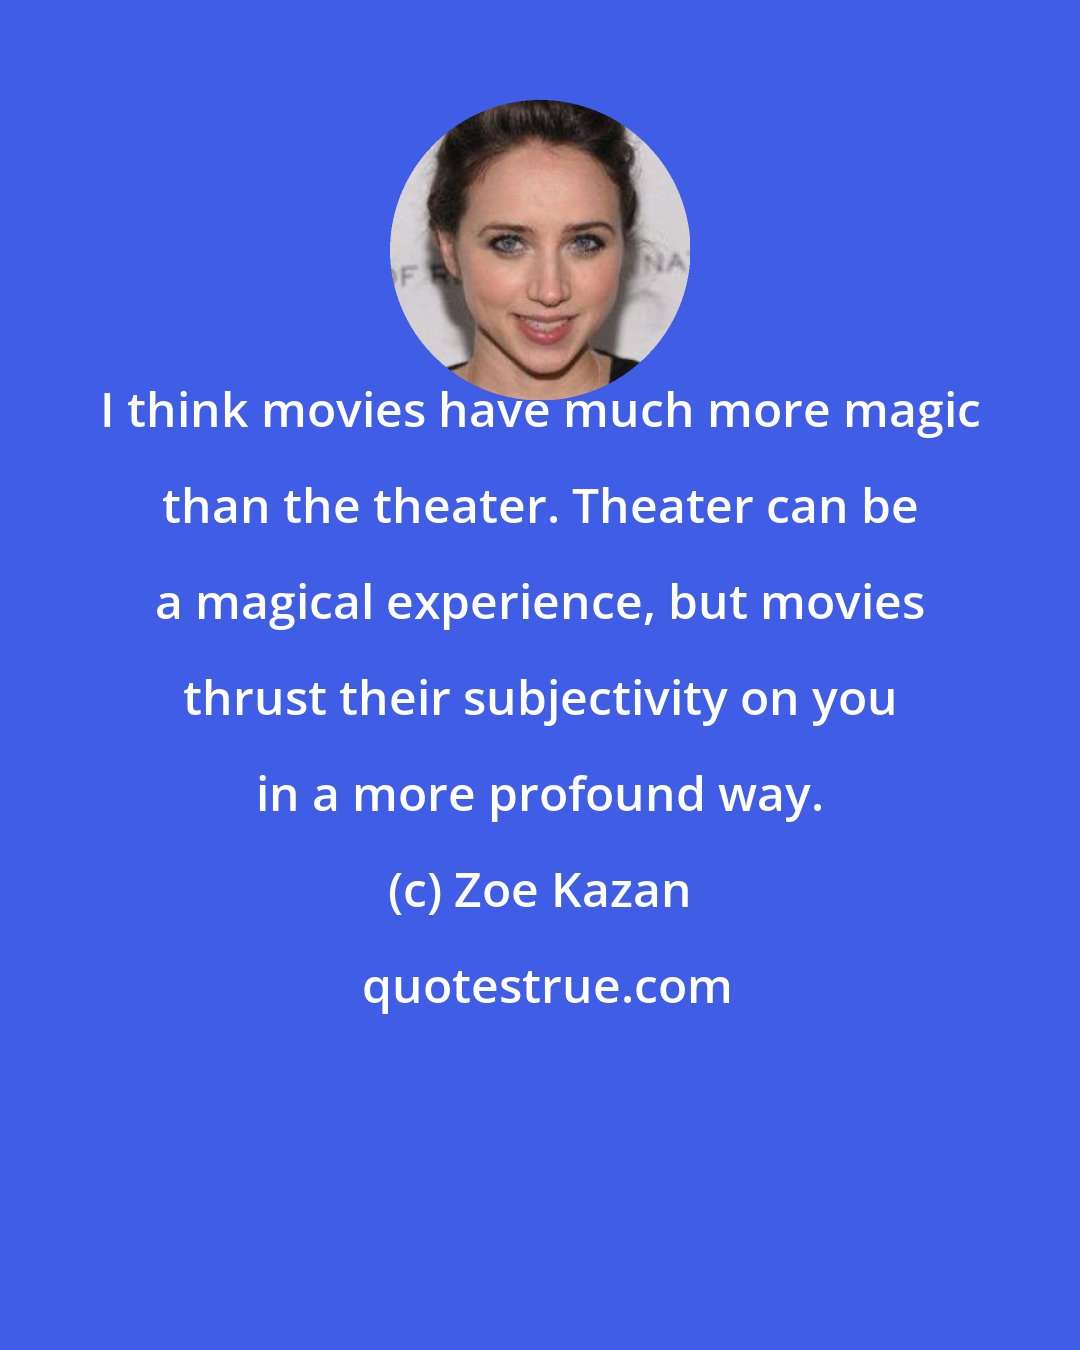 Zoe Kazan: I think movies have much more magic than the theater. Theater can be a magical experience, but movies thrust their subjectivity on you in a more profound way.